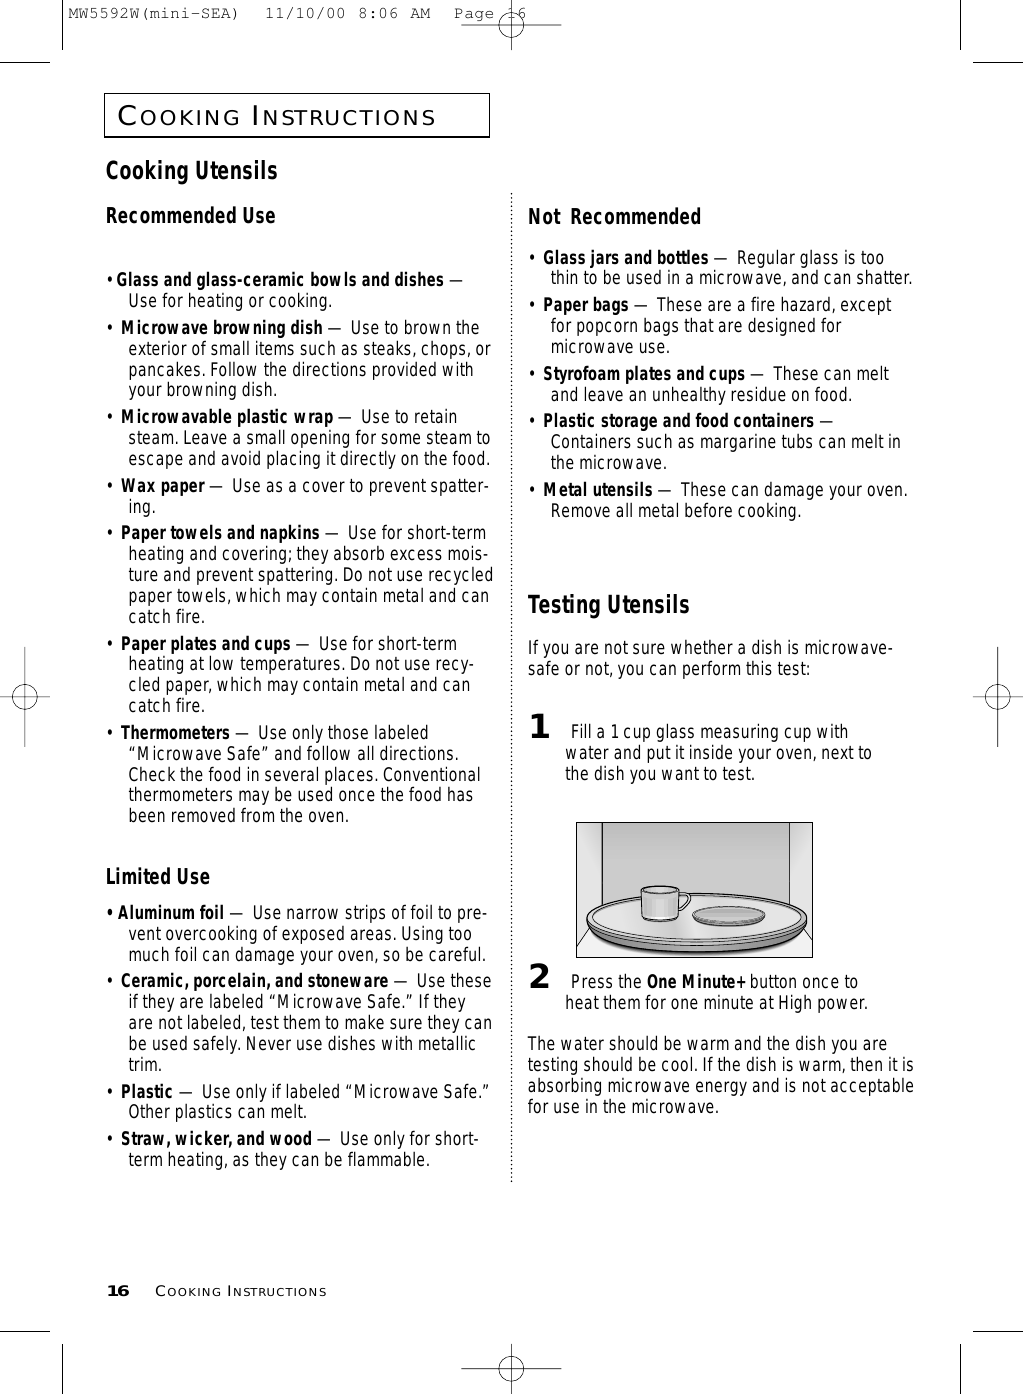 COOKINGINSTRUCTIONS16 COOKINGINSTRUCTIONSCooking UtensilsRecommended Use• Glass and glass-ceramic bowls and dishes —Use for heating or cooking.•  Microwave browning dish — Use to brown theexterior of small items such as steaks, chops, orpancakes. Follow the directions provided withyour browning dish.•  Microwavable plastic wrap — Use to retainsteam. Leave a small opening for some steam toescape and avoid placing it directly on the food.•  Wax paper — Use as a cover to prevent spatter-ing.•  Paper towels and napkins — Use for short-termheating and covering; they absorb excess mois-ture and prevent spattering. Do not use recycledpaper towels, which may contain metal and cancatch fire.•  Paper plates and cups — Use for short-termheating at low temperatures. Do not use recy-cled paper, which may contain metal and cancatch fire.•  Thermometers — Use only those labeled“Microwave Safe” and follow all directions.Check the food in several places. Conventionalthermometers may be used once the food hasbeen removed from the oven.Limited Use• Aluminum foil — Use narrow strips of foil to pre-vent overcooking of exposed areas. Using toomuch foil can damage your oven, so be careful.•  Ceramic, porcelain, and stoneware — Use theseif they are labeled “Microwave Safe.” If theyare not labeled, test them to make sure they canbe used safely. Never use dishes with metallictrim.•  Plastic — Use only if labeled “Microwave Safe.”Other plastics can melt.•  Straw, wicker, and wood — Use only for short-term heating, as they can be flammable.Not  Recommended•  Glass jars and bottles — Regular glass is toothin to be used in a microwave, and can shatter.•  Paper bags — These are a fire hazard, exceptfor popcorn bags that are designed formicrowave use.•  Styrofoam plates and cups — These can meltand leave an unhealthy residue on food.•  Plastic storage and food containers —Containers such as margarine tubs can melt inthe microwave.•  Metal utensils — These can damage your oven.Remove all metal before cooking. Testing UtensilsIf you are not sure whether a dish is microwave-safe or not, you can perform this test:1Fill a 1 cup glass measuring cup withwater and put it inside your oven, next tothe dish you want to test.2Press the One Minute+ button once toheat them for one minute at High power.The water should be warm and the dish you aretesting should be cool. If the dish is warm, then it isabsorbing microwave energy and is not acceptablefor use in the microwave.MW5592W(mini-SEA)  11/10/00 8:06 AM  Page 16